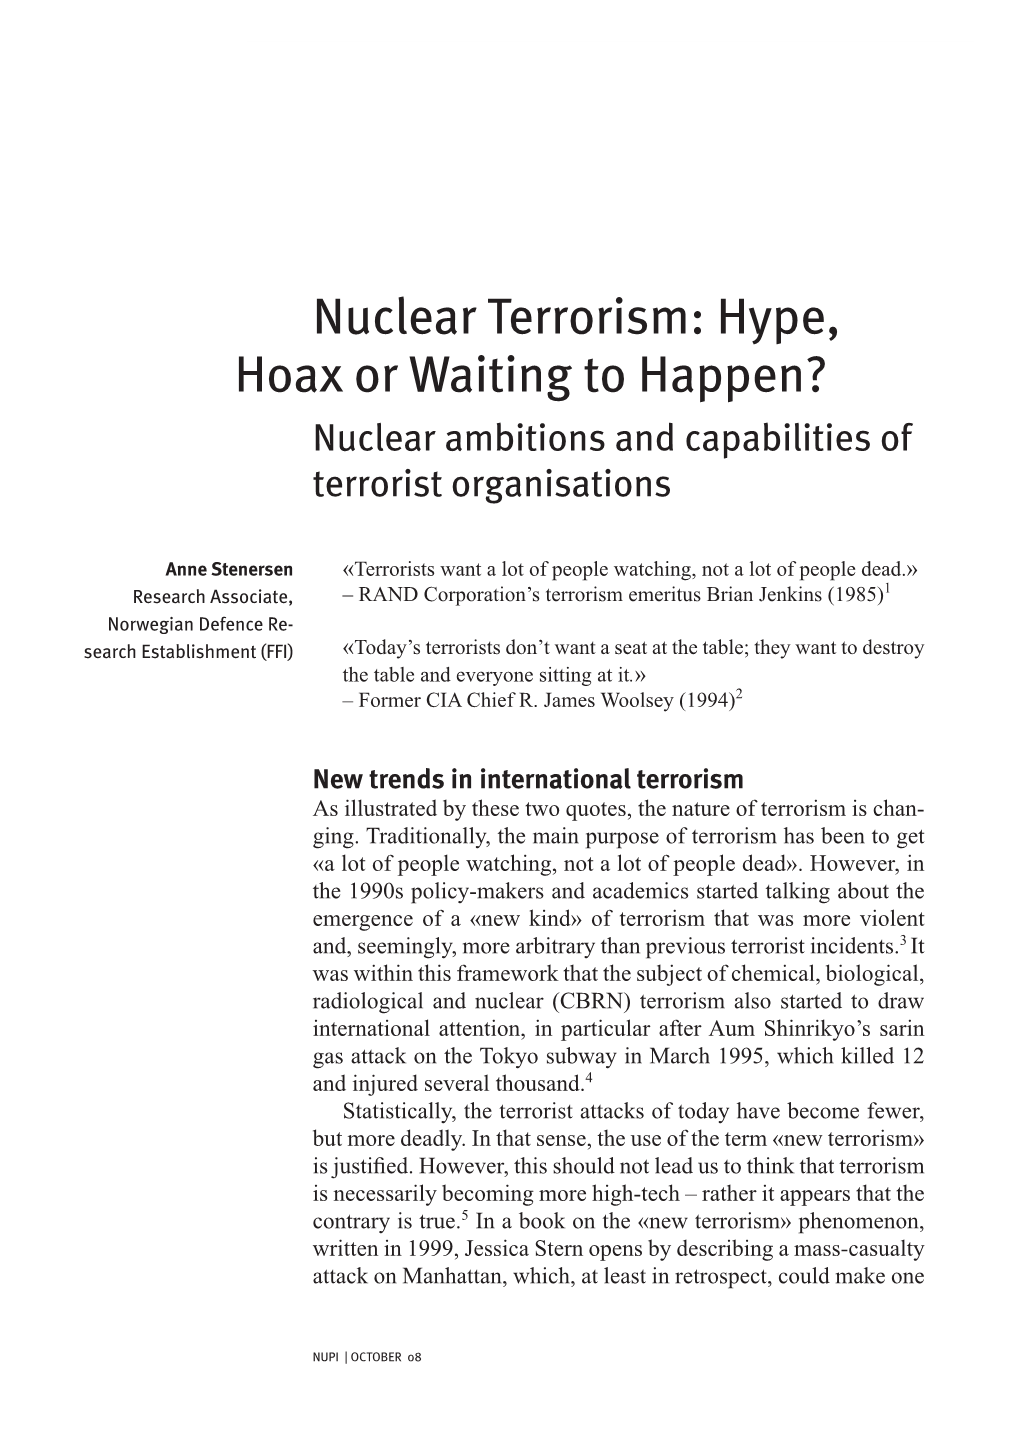 Nuclear Terrorism: Hype, Hoax Or Waiting to Happen? 109